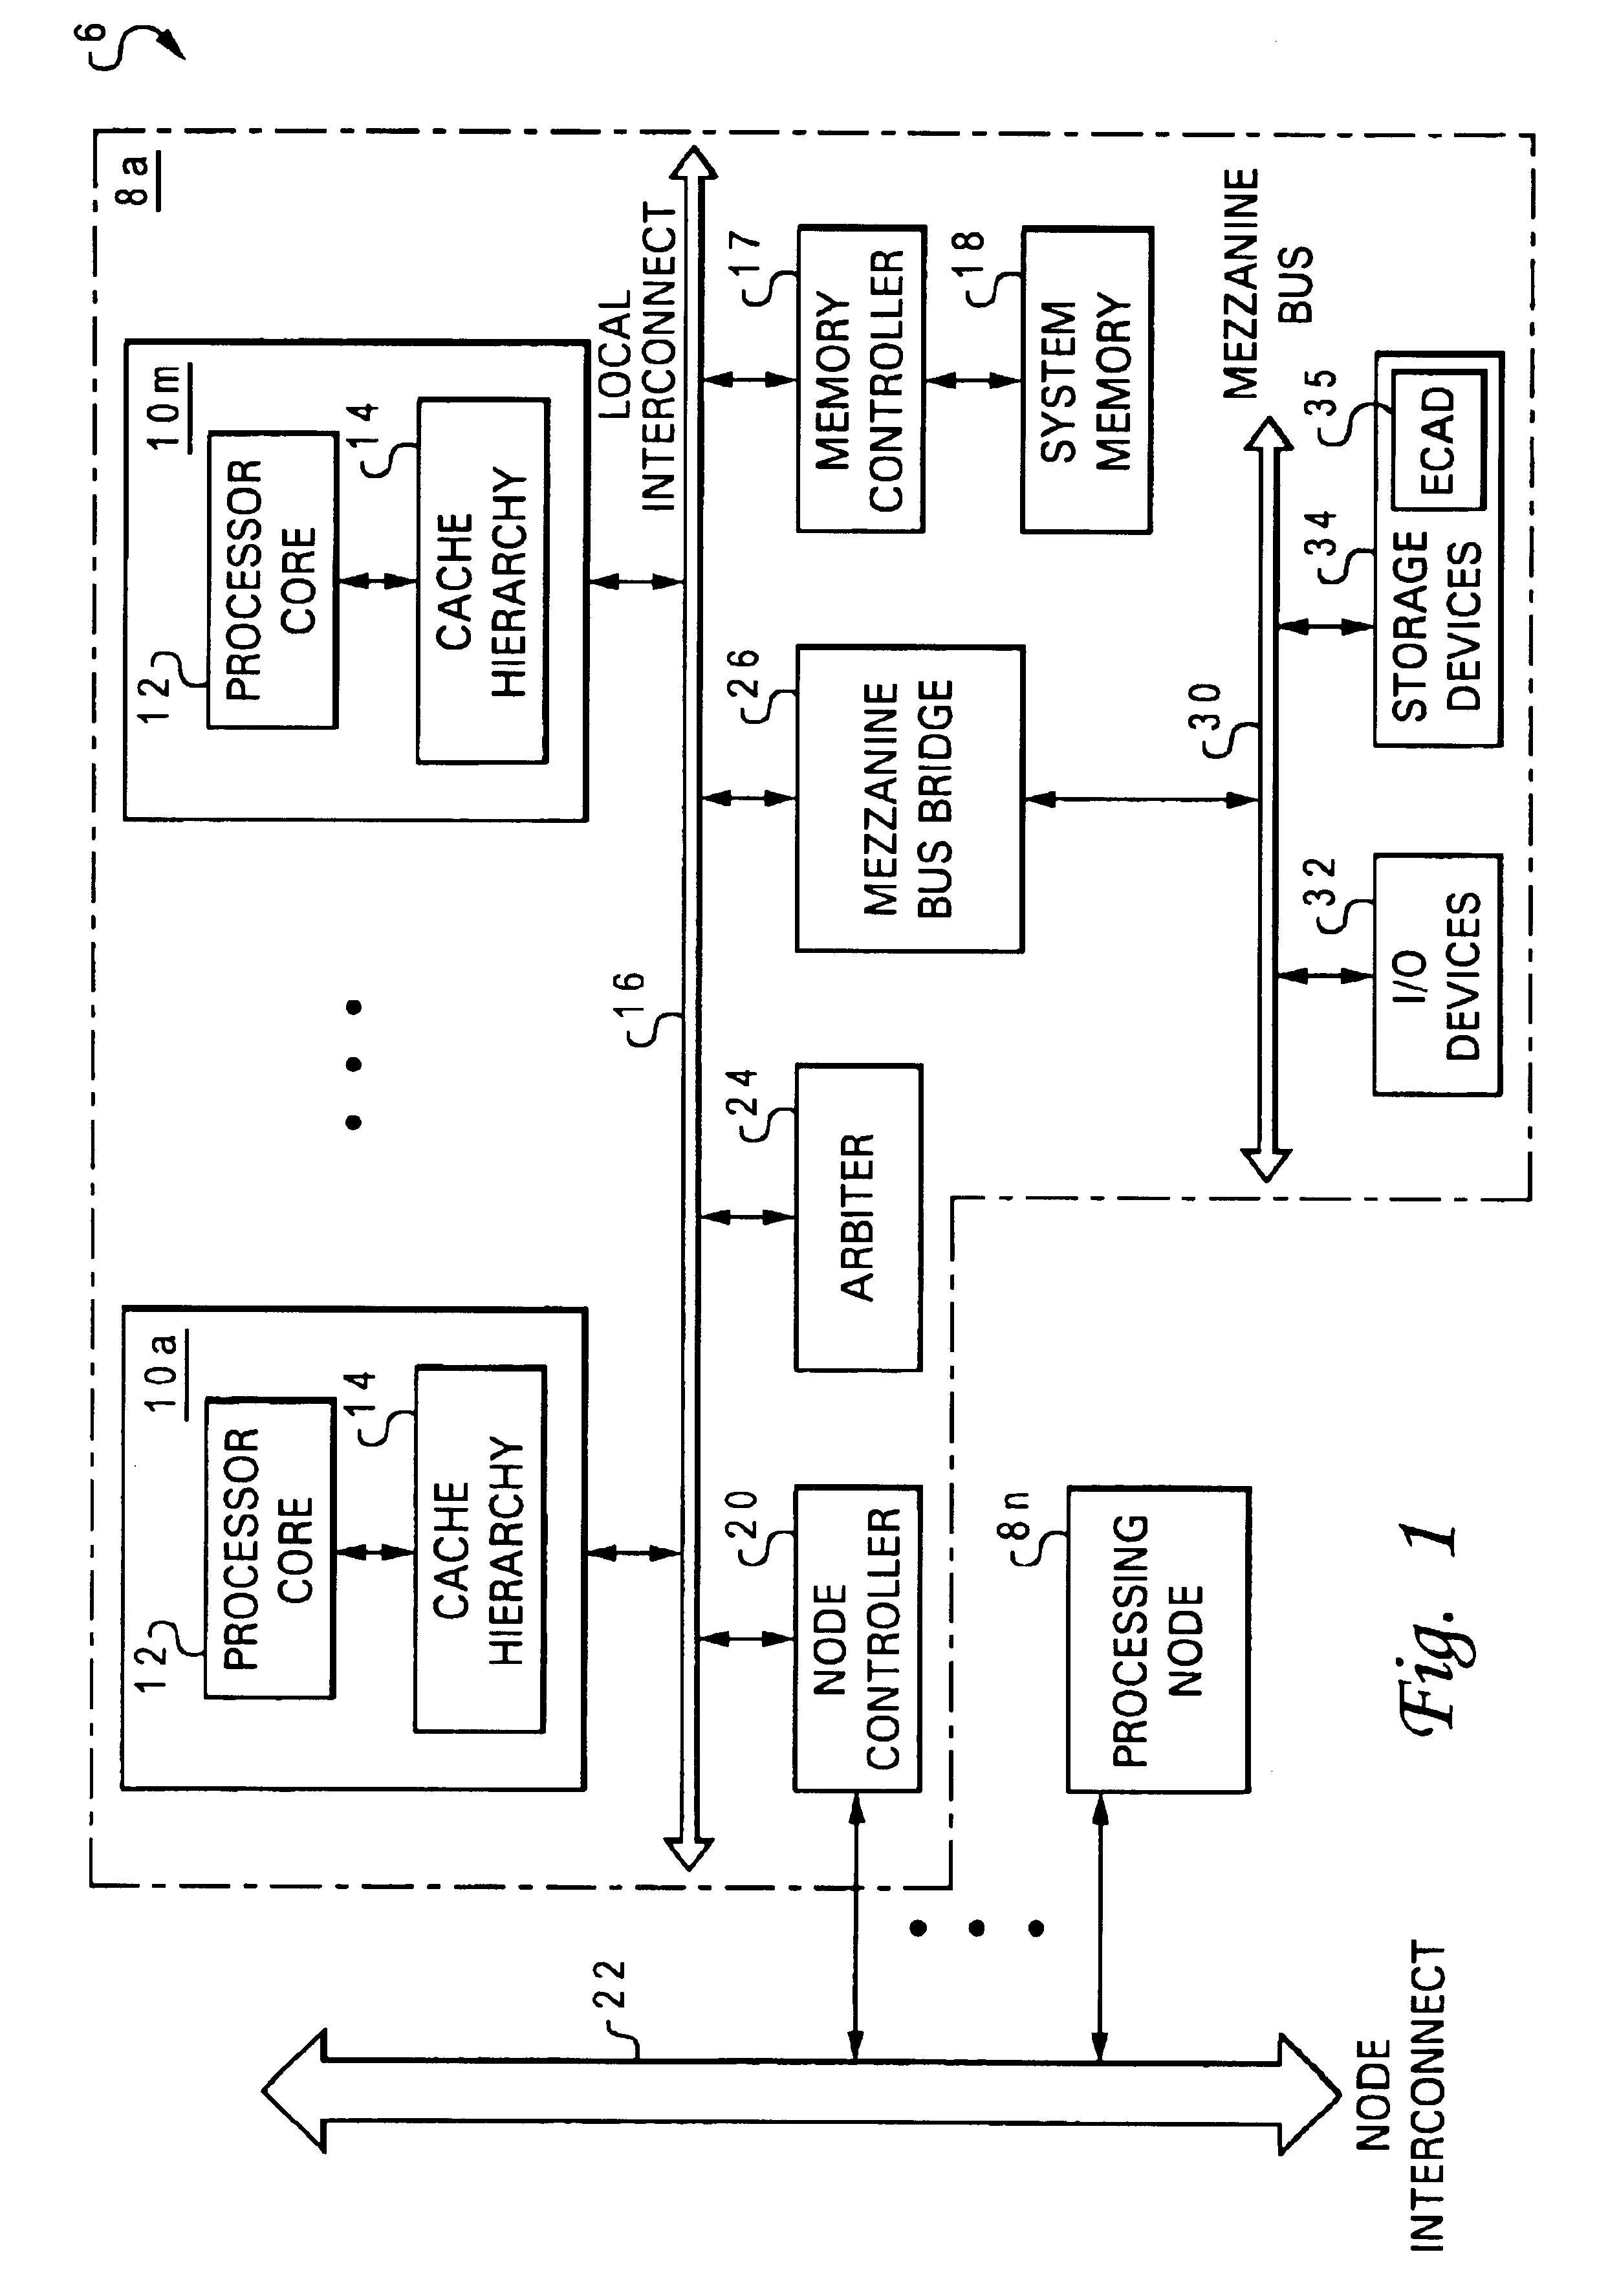 Method, system and program product for utilizing a configuration database to configure a hardware digital system